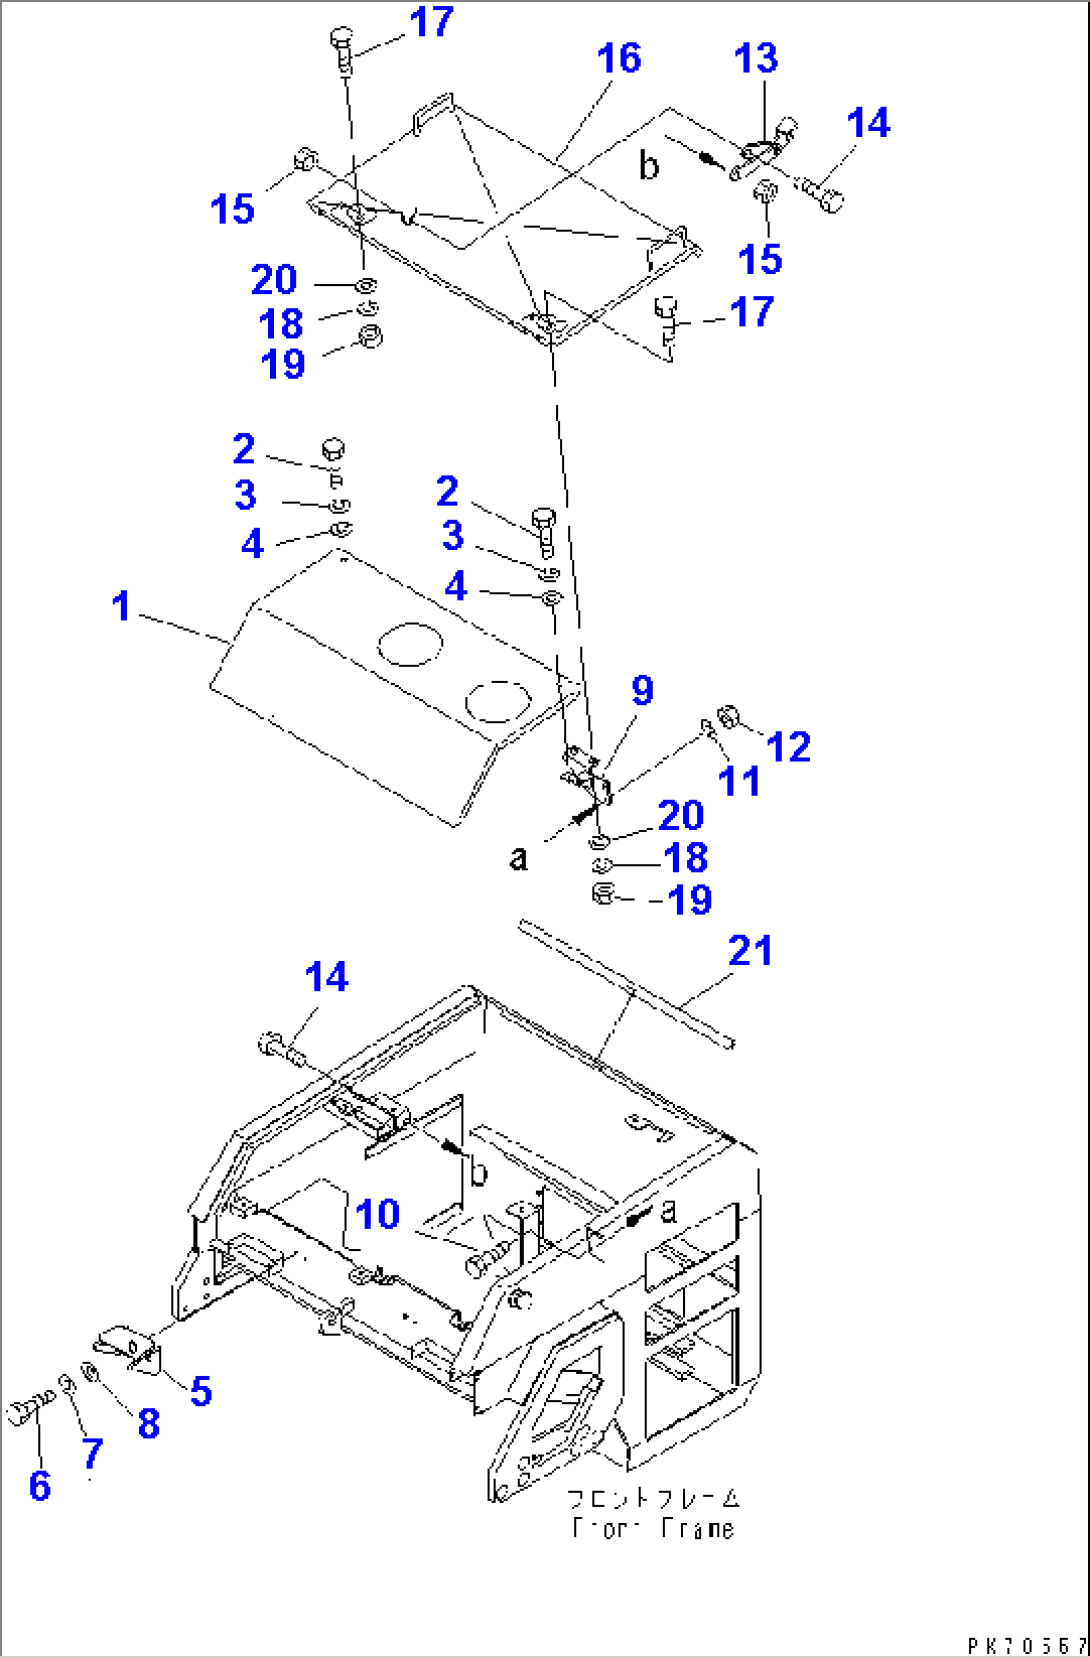 FRONT FRAME AND COVER (2/2)